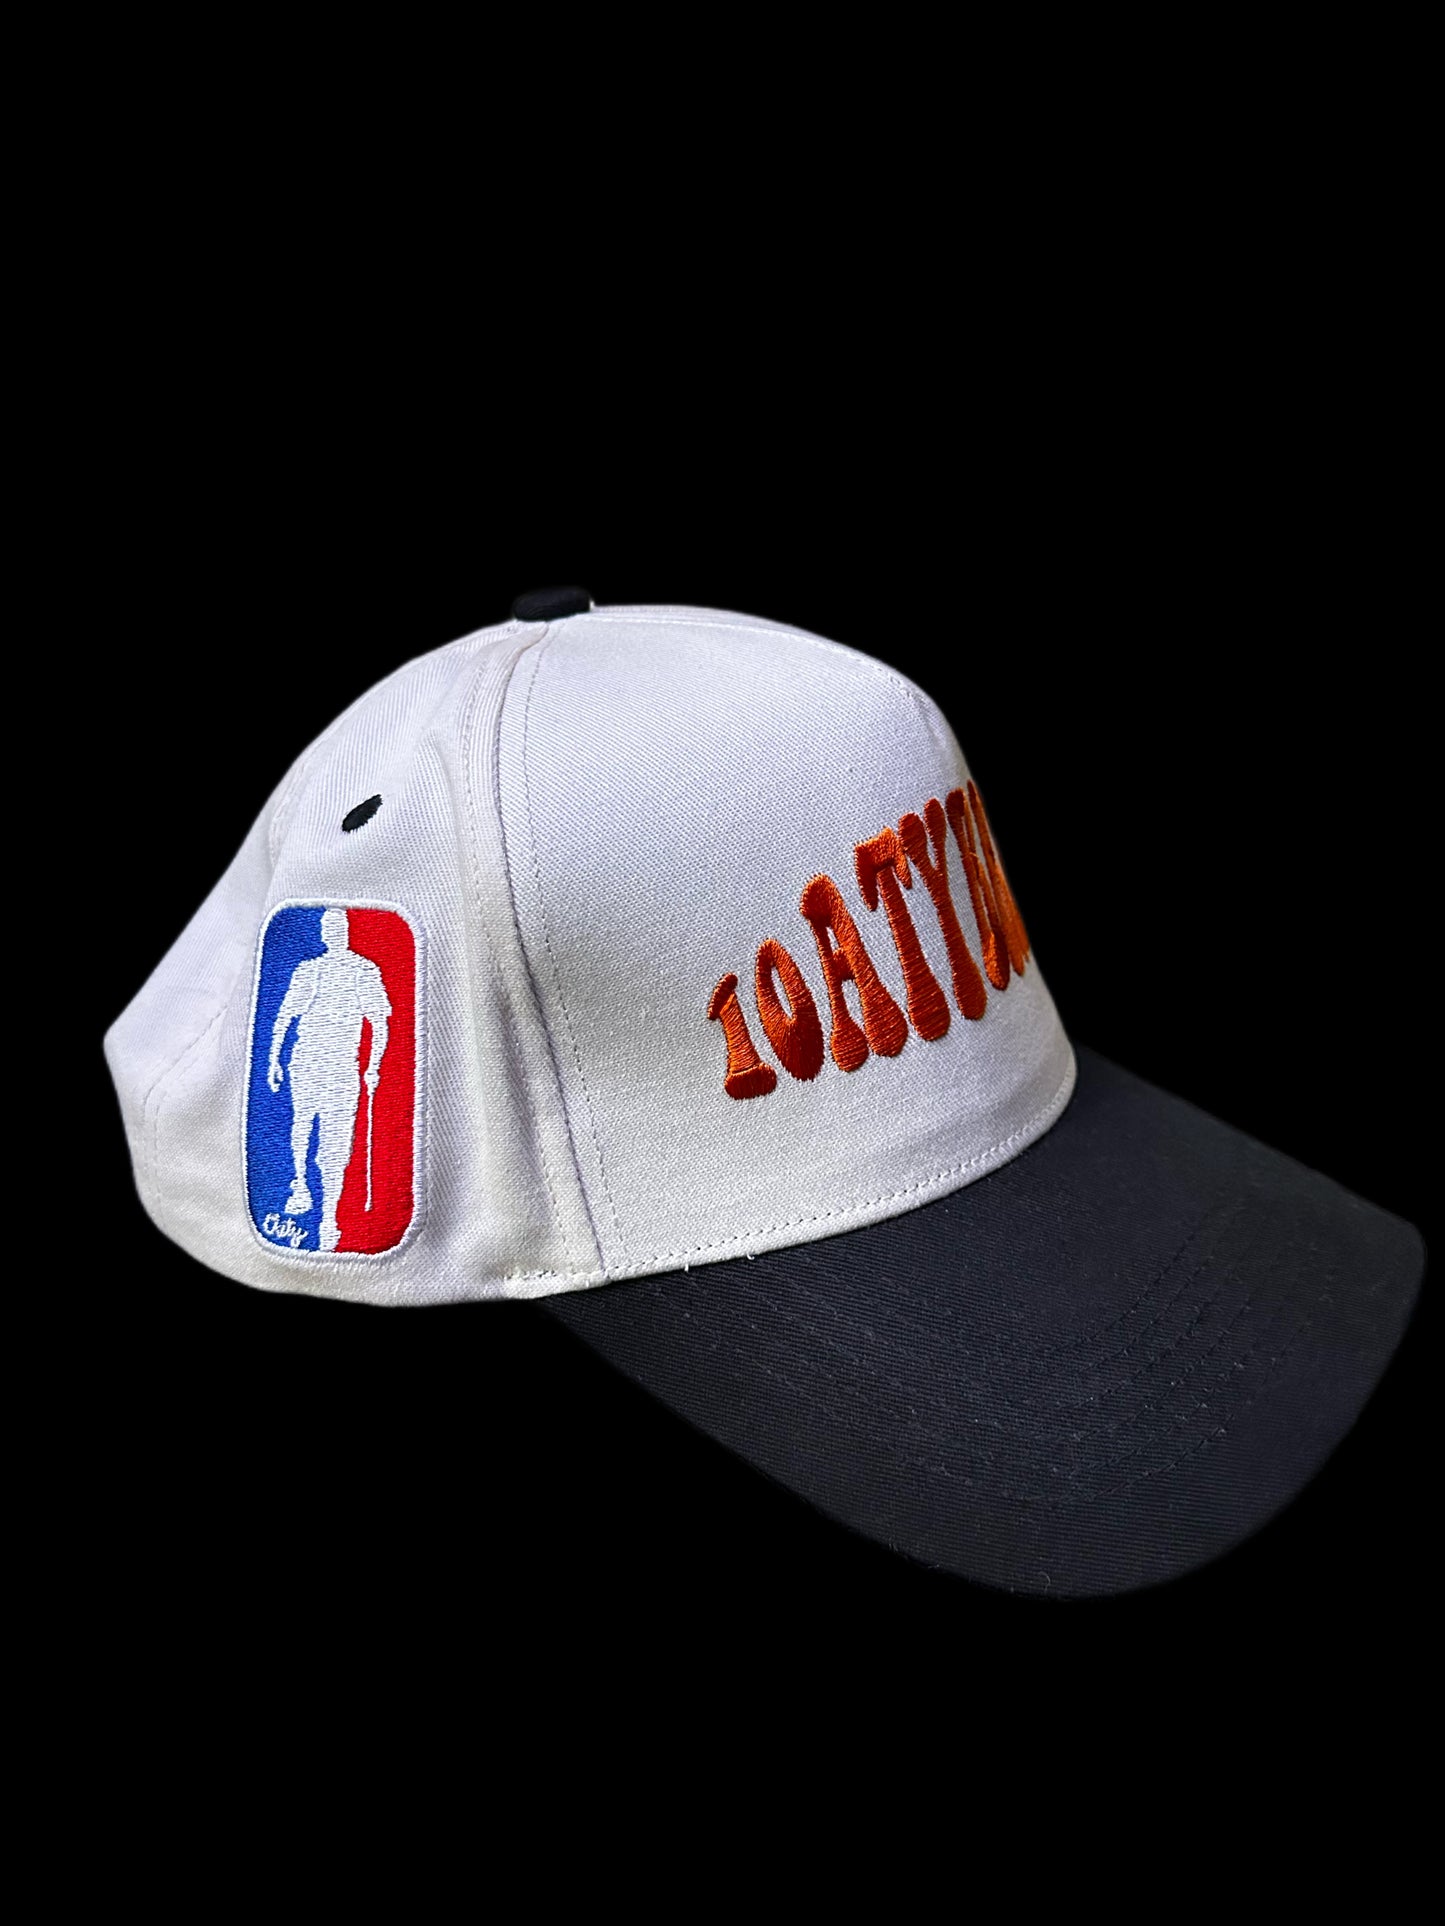 Snap back 405Day hat